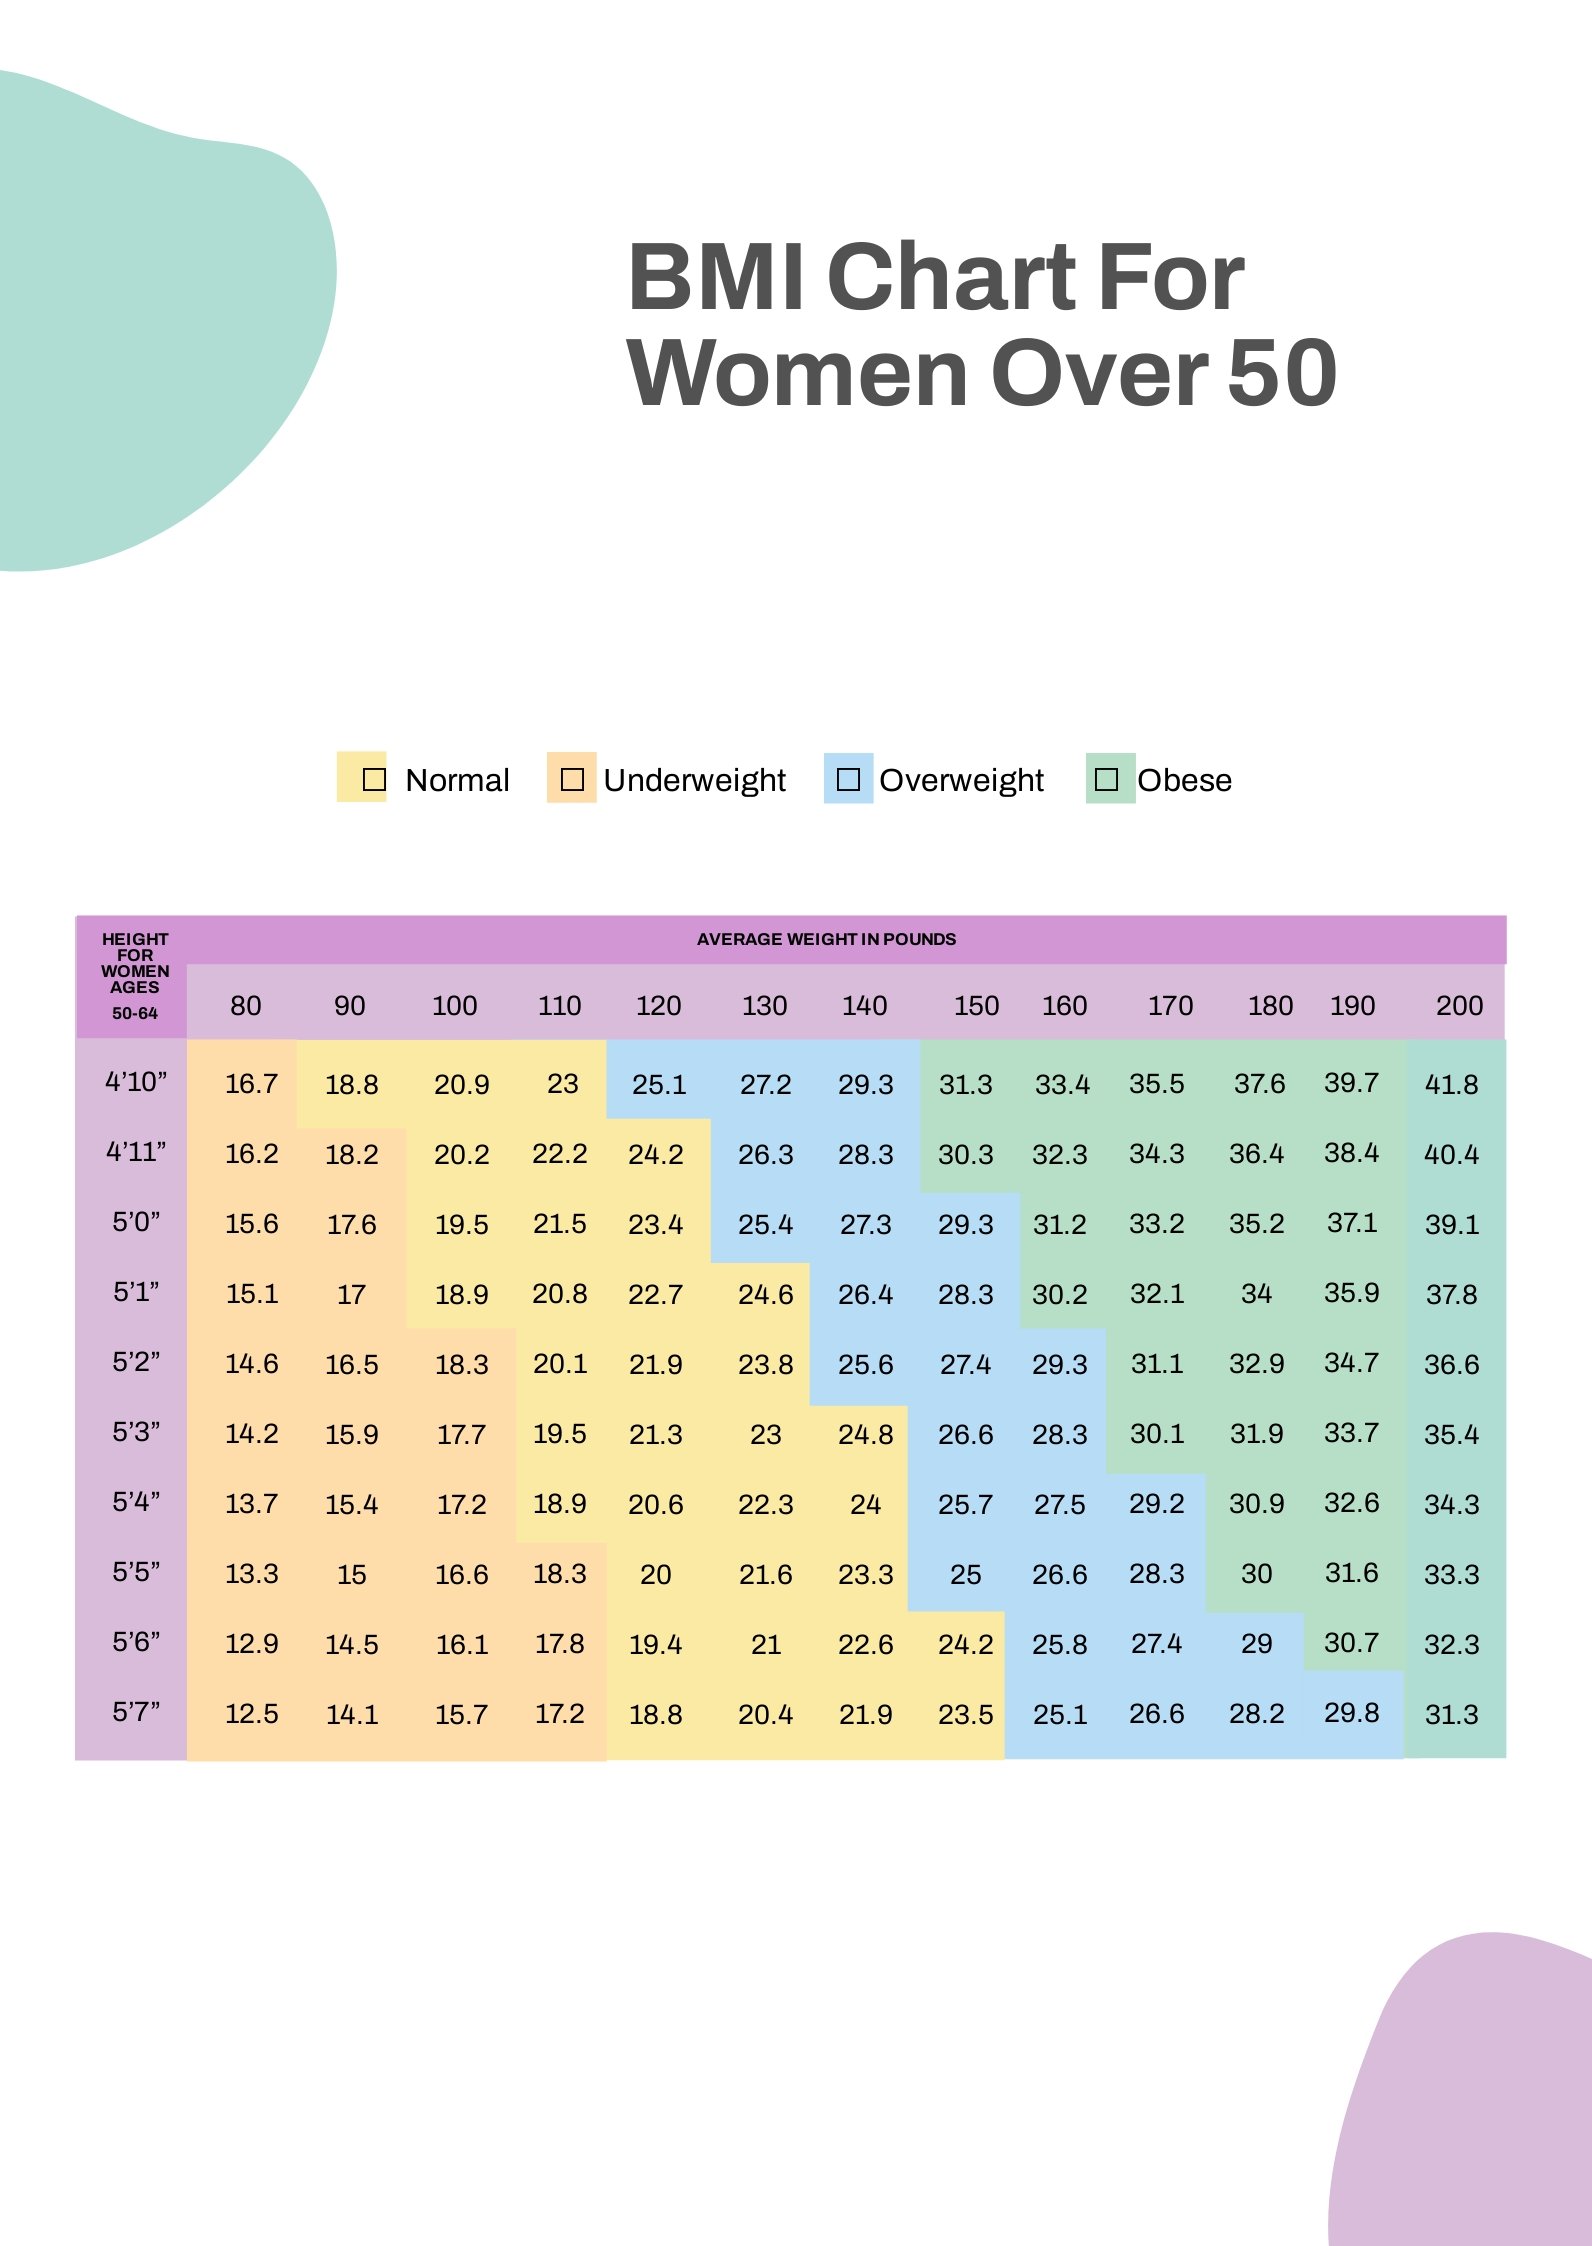 BMI Chart For Women Over 50